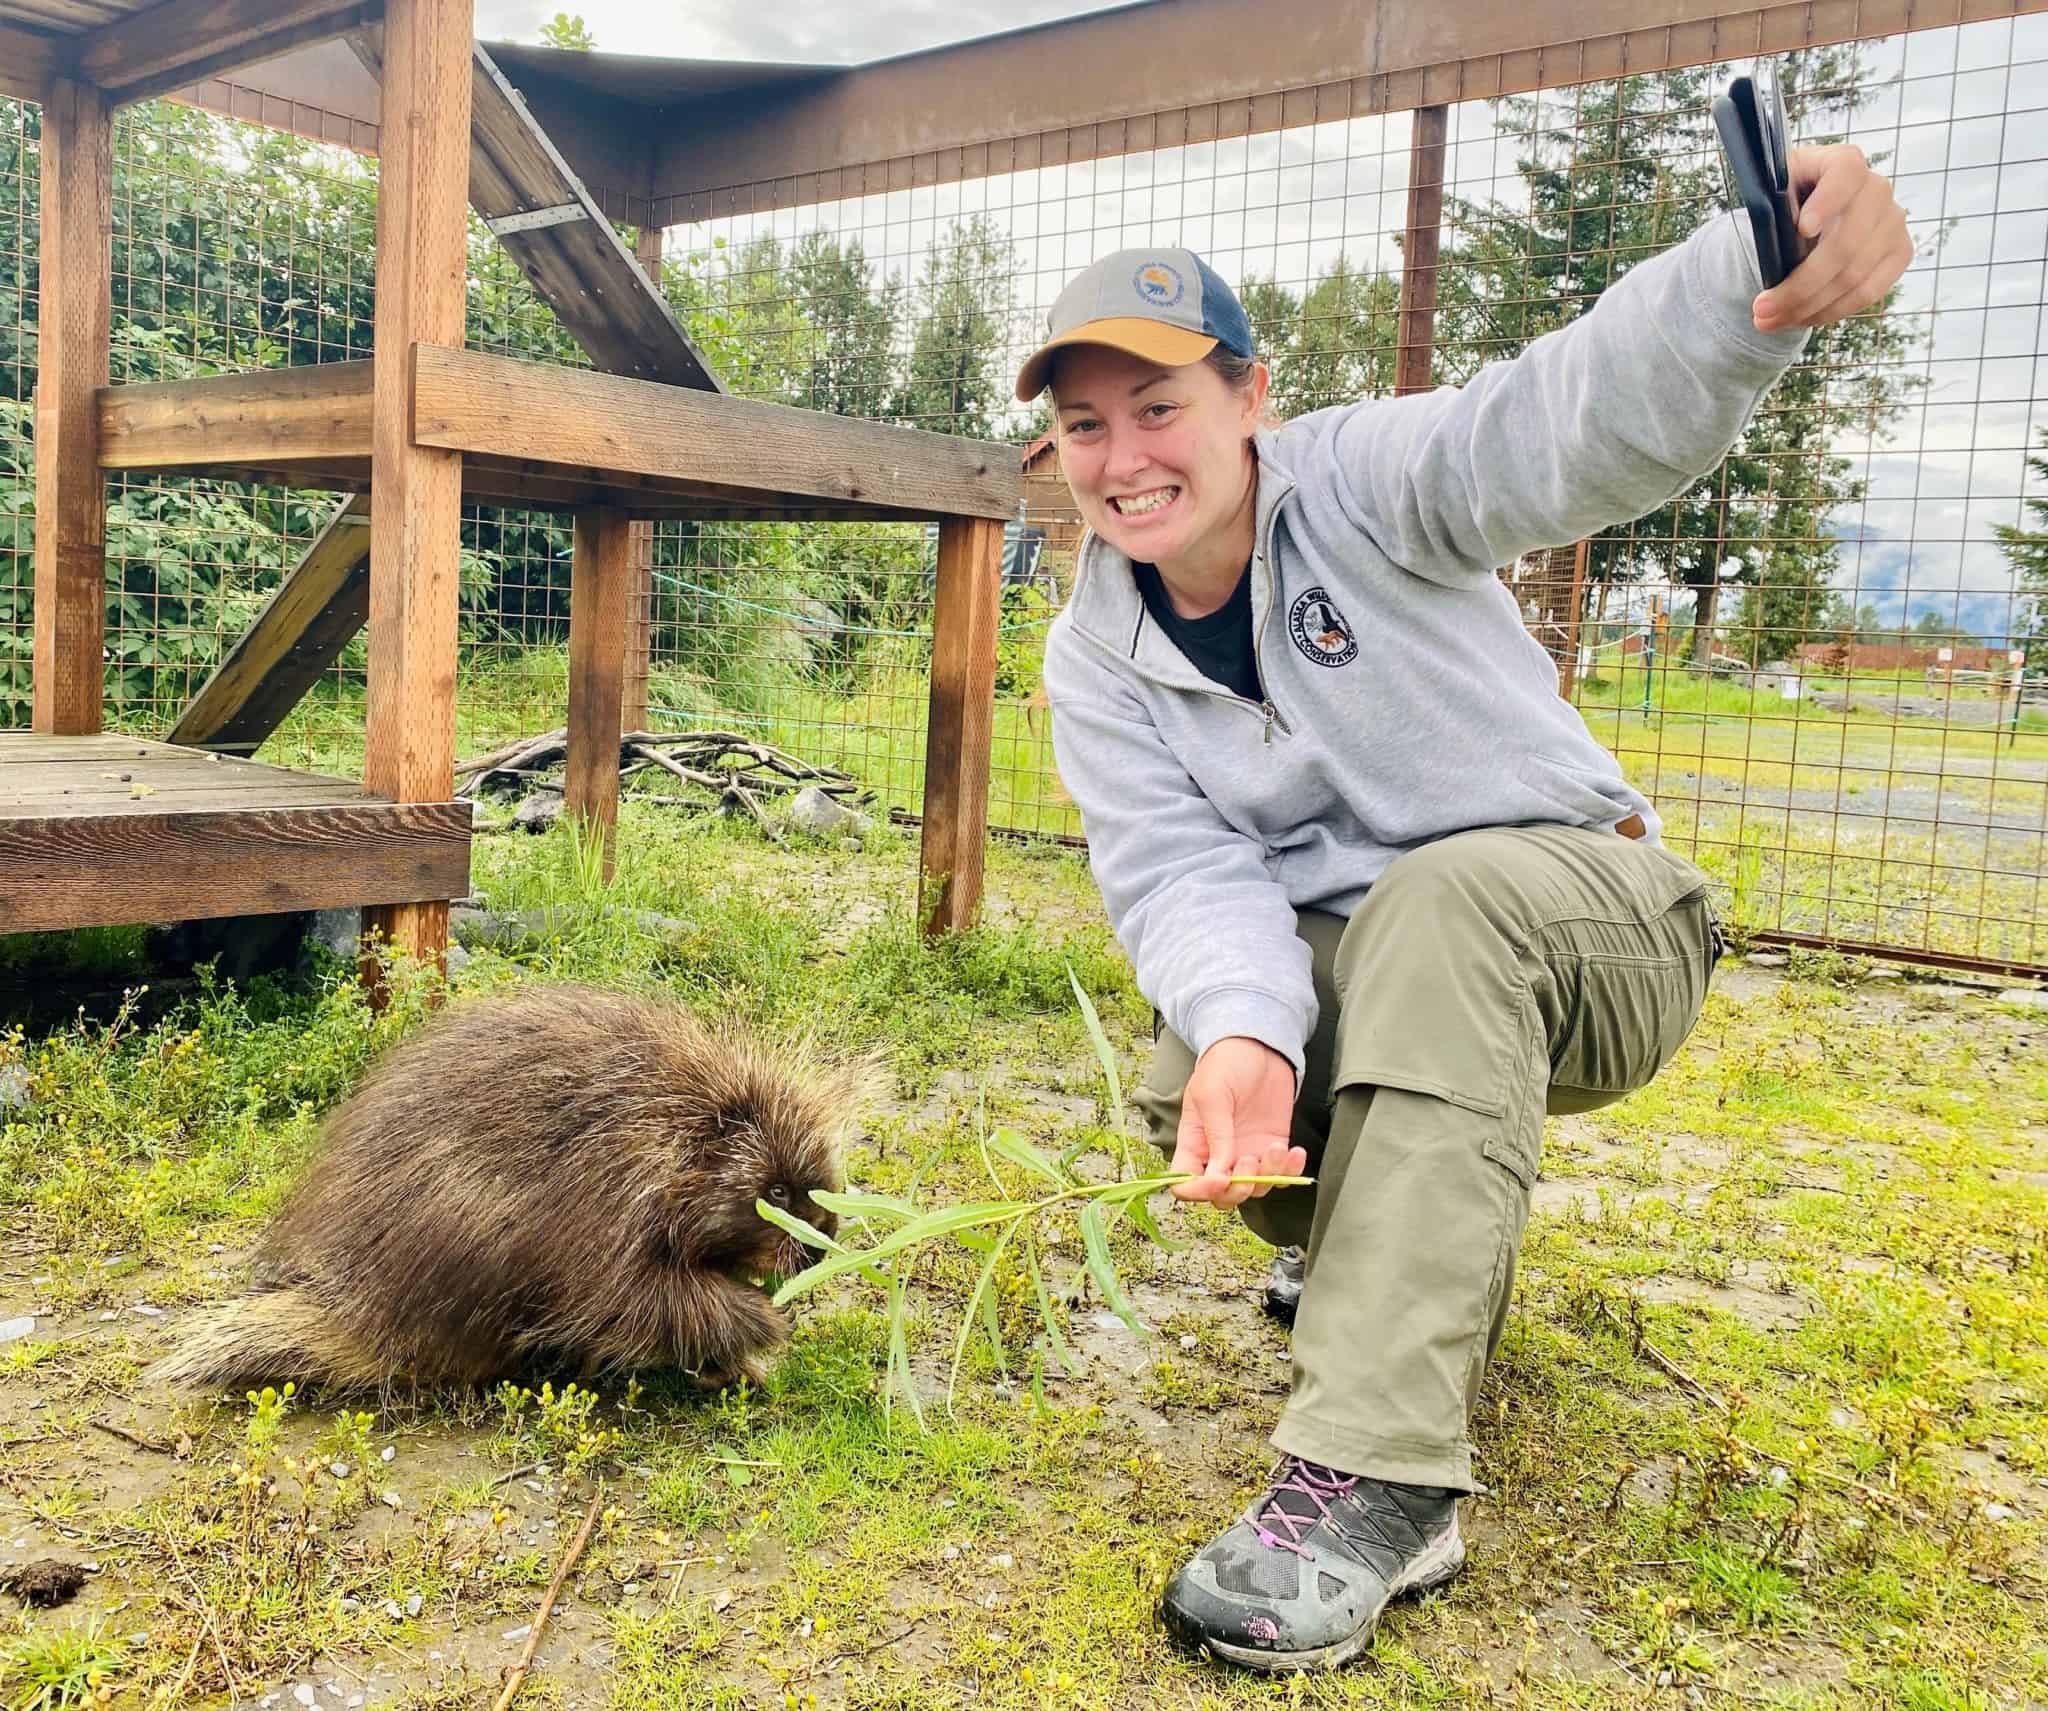 A person take a photo of themselves feeding a porcupine